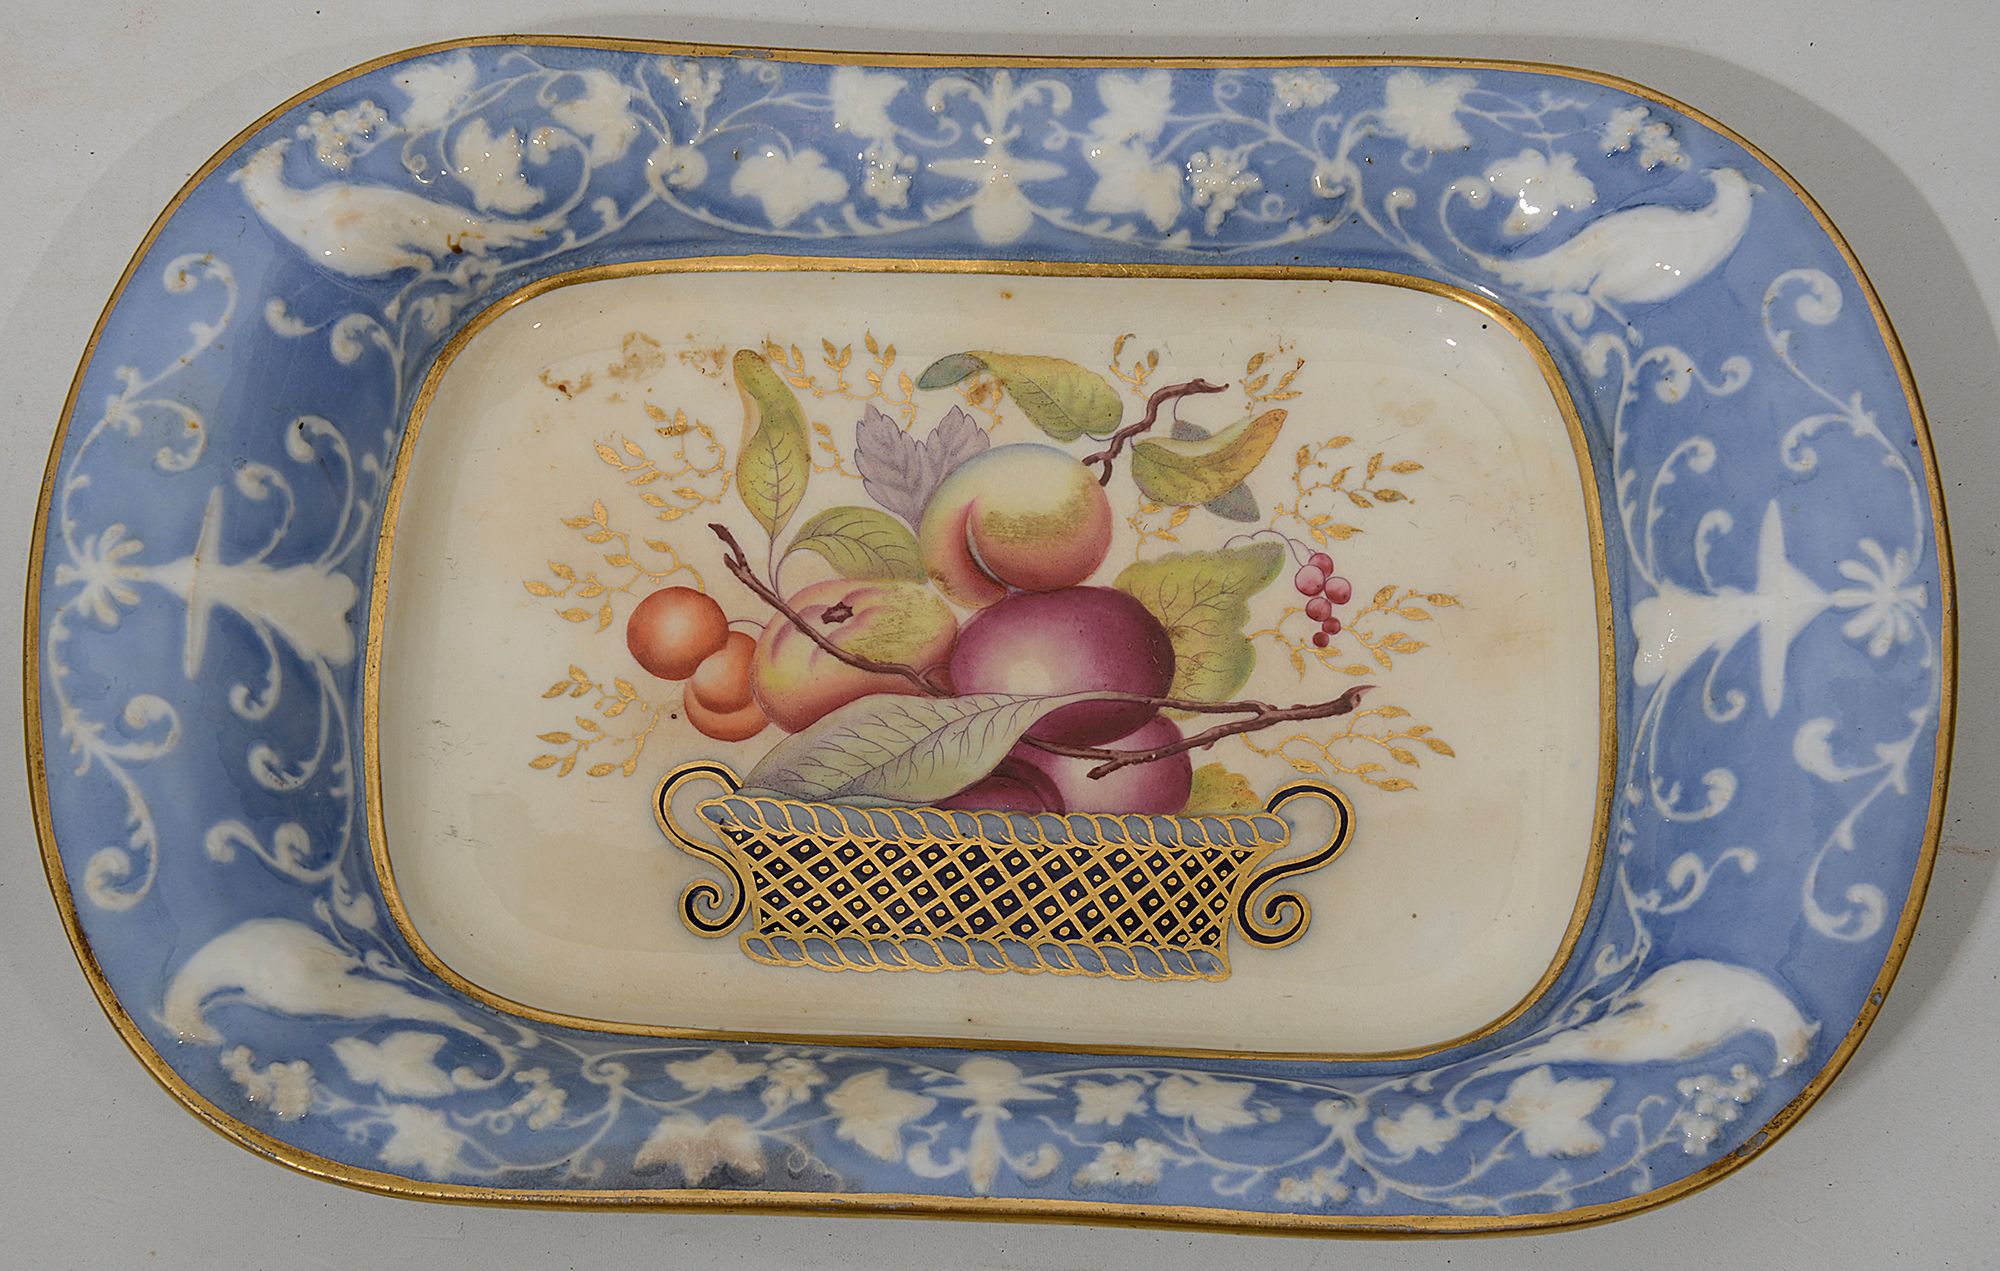 An early 19th century New Hall bone china part dessert service c.1815-20 - Image 2 of 4